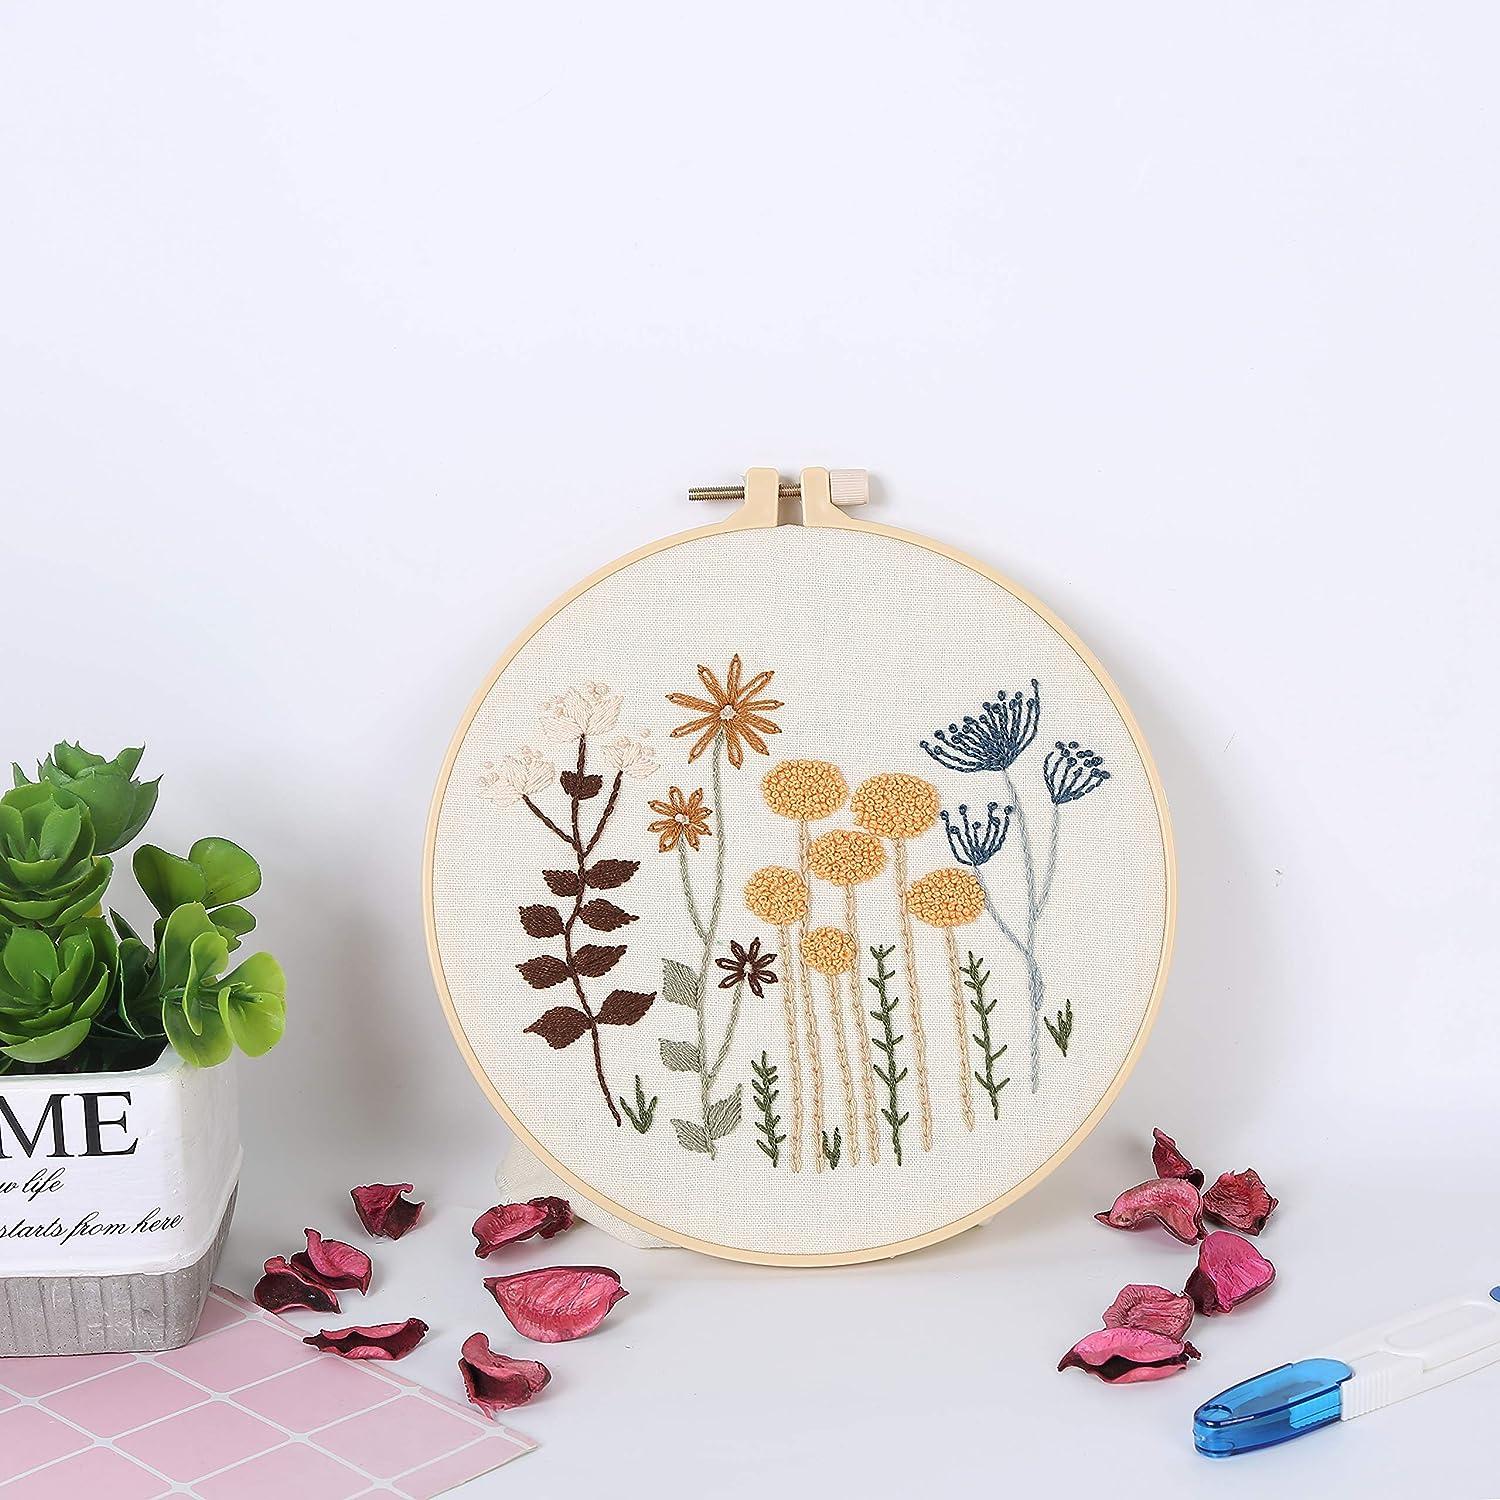 Embroidery kit for Adults Beginners with Embroidery Pattern